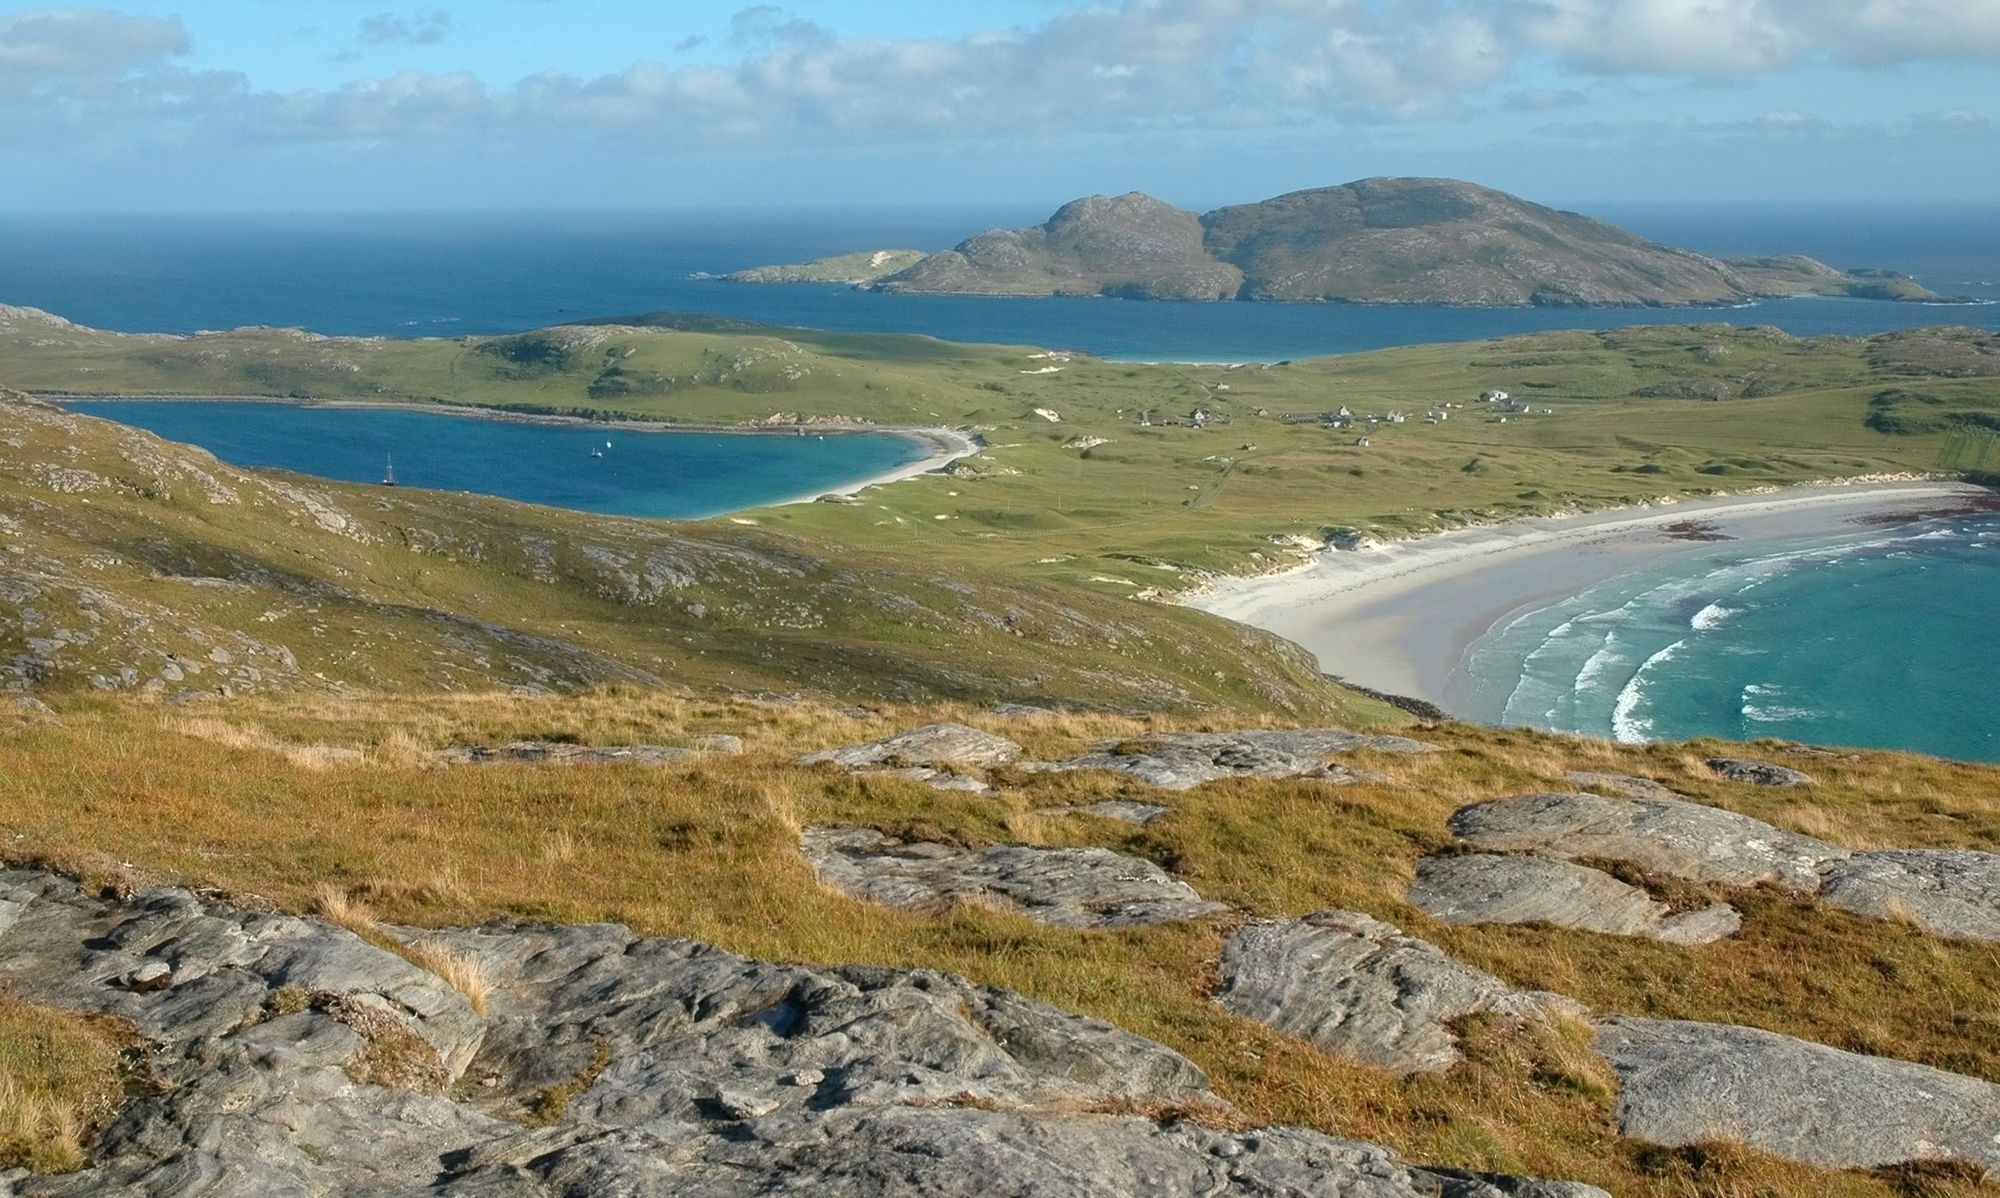 The most southerly inhabited island of the Outer Hebrides, Vatersay, is the starting point for the Hebridean Way. Photo: Getty